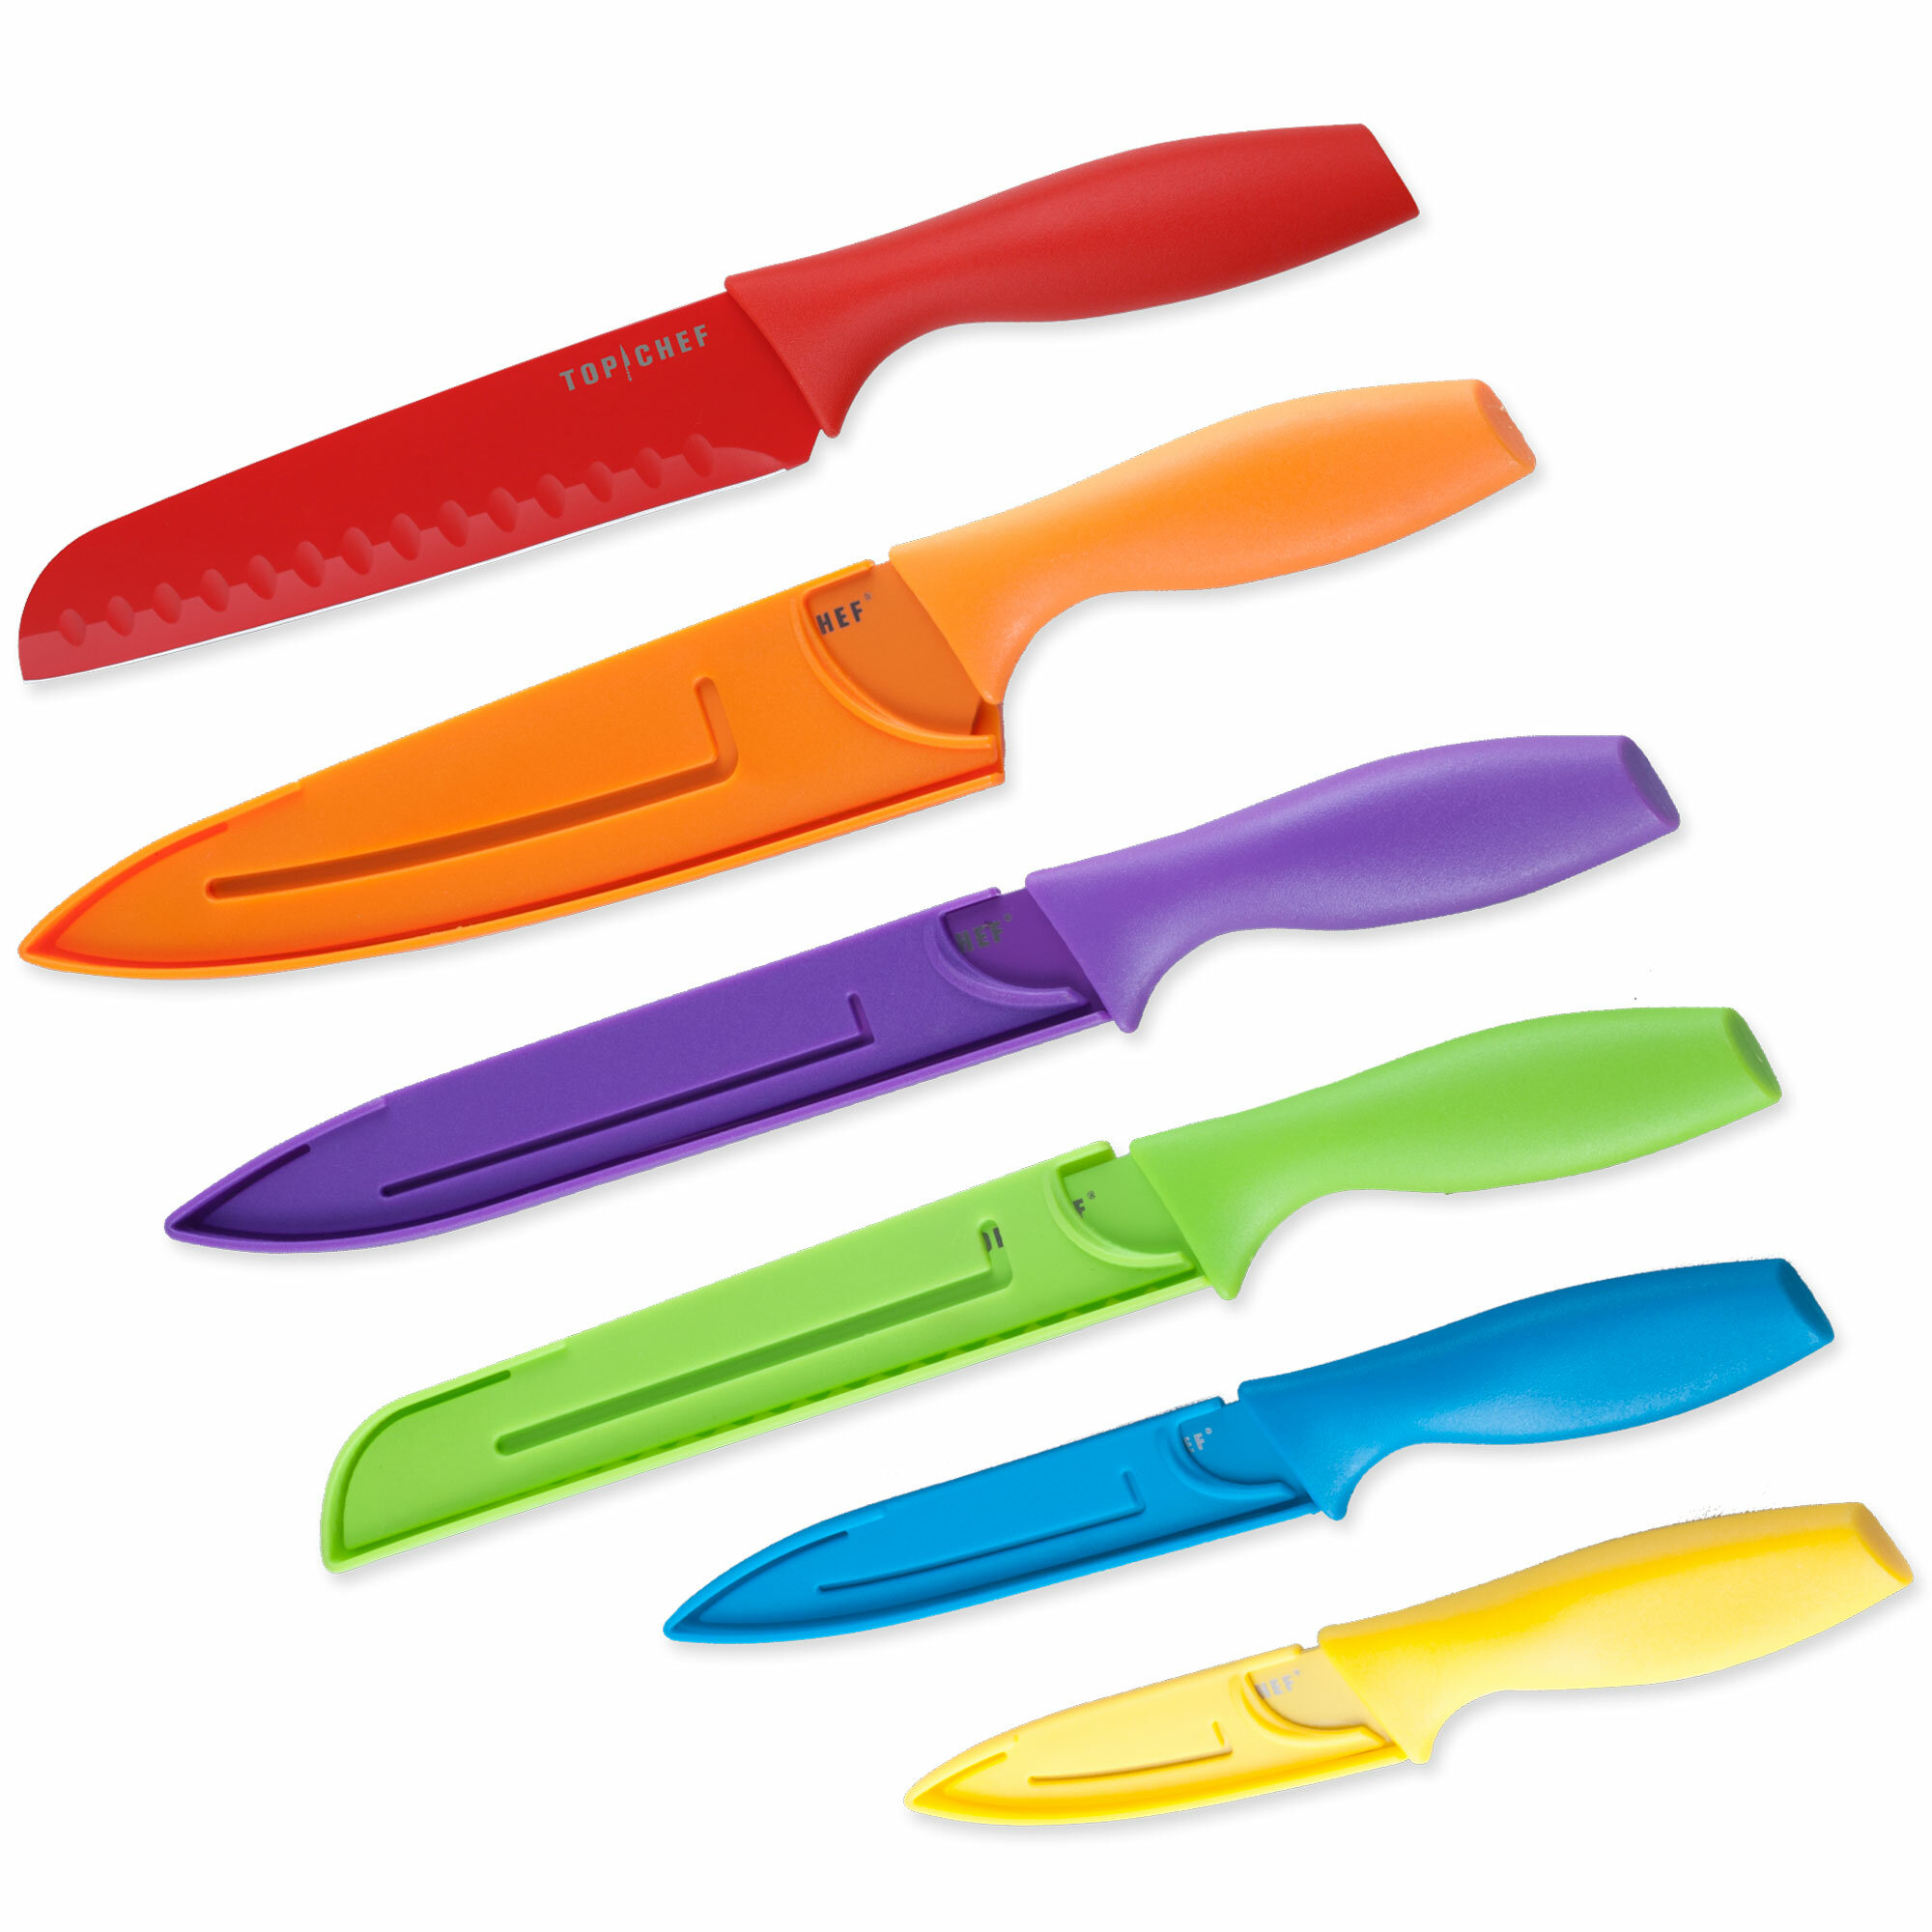 16 pcs Zyliss, Cuisinart and Assorted Knife Set Multicolor With Blade  Guards